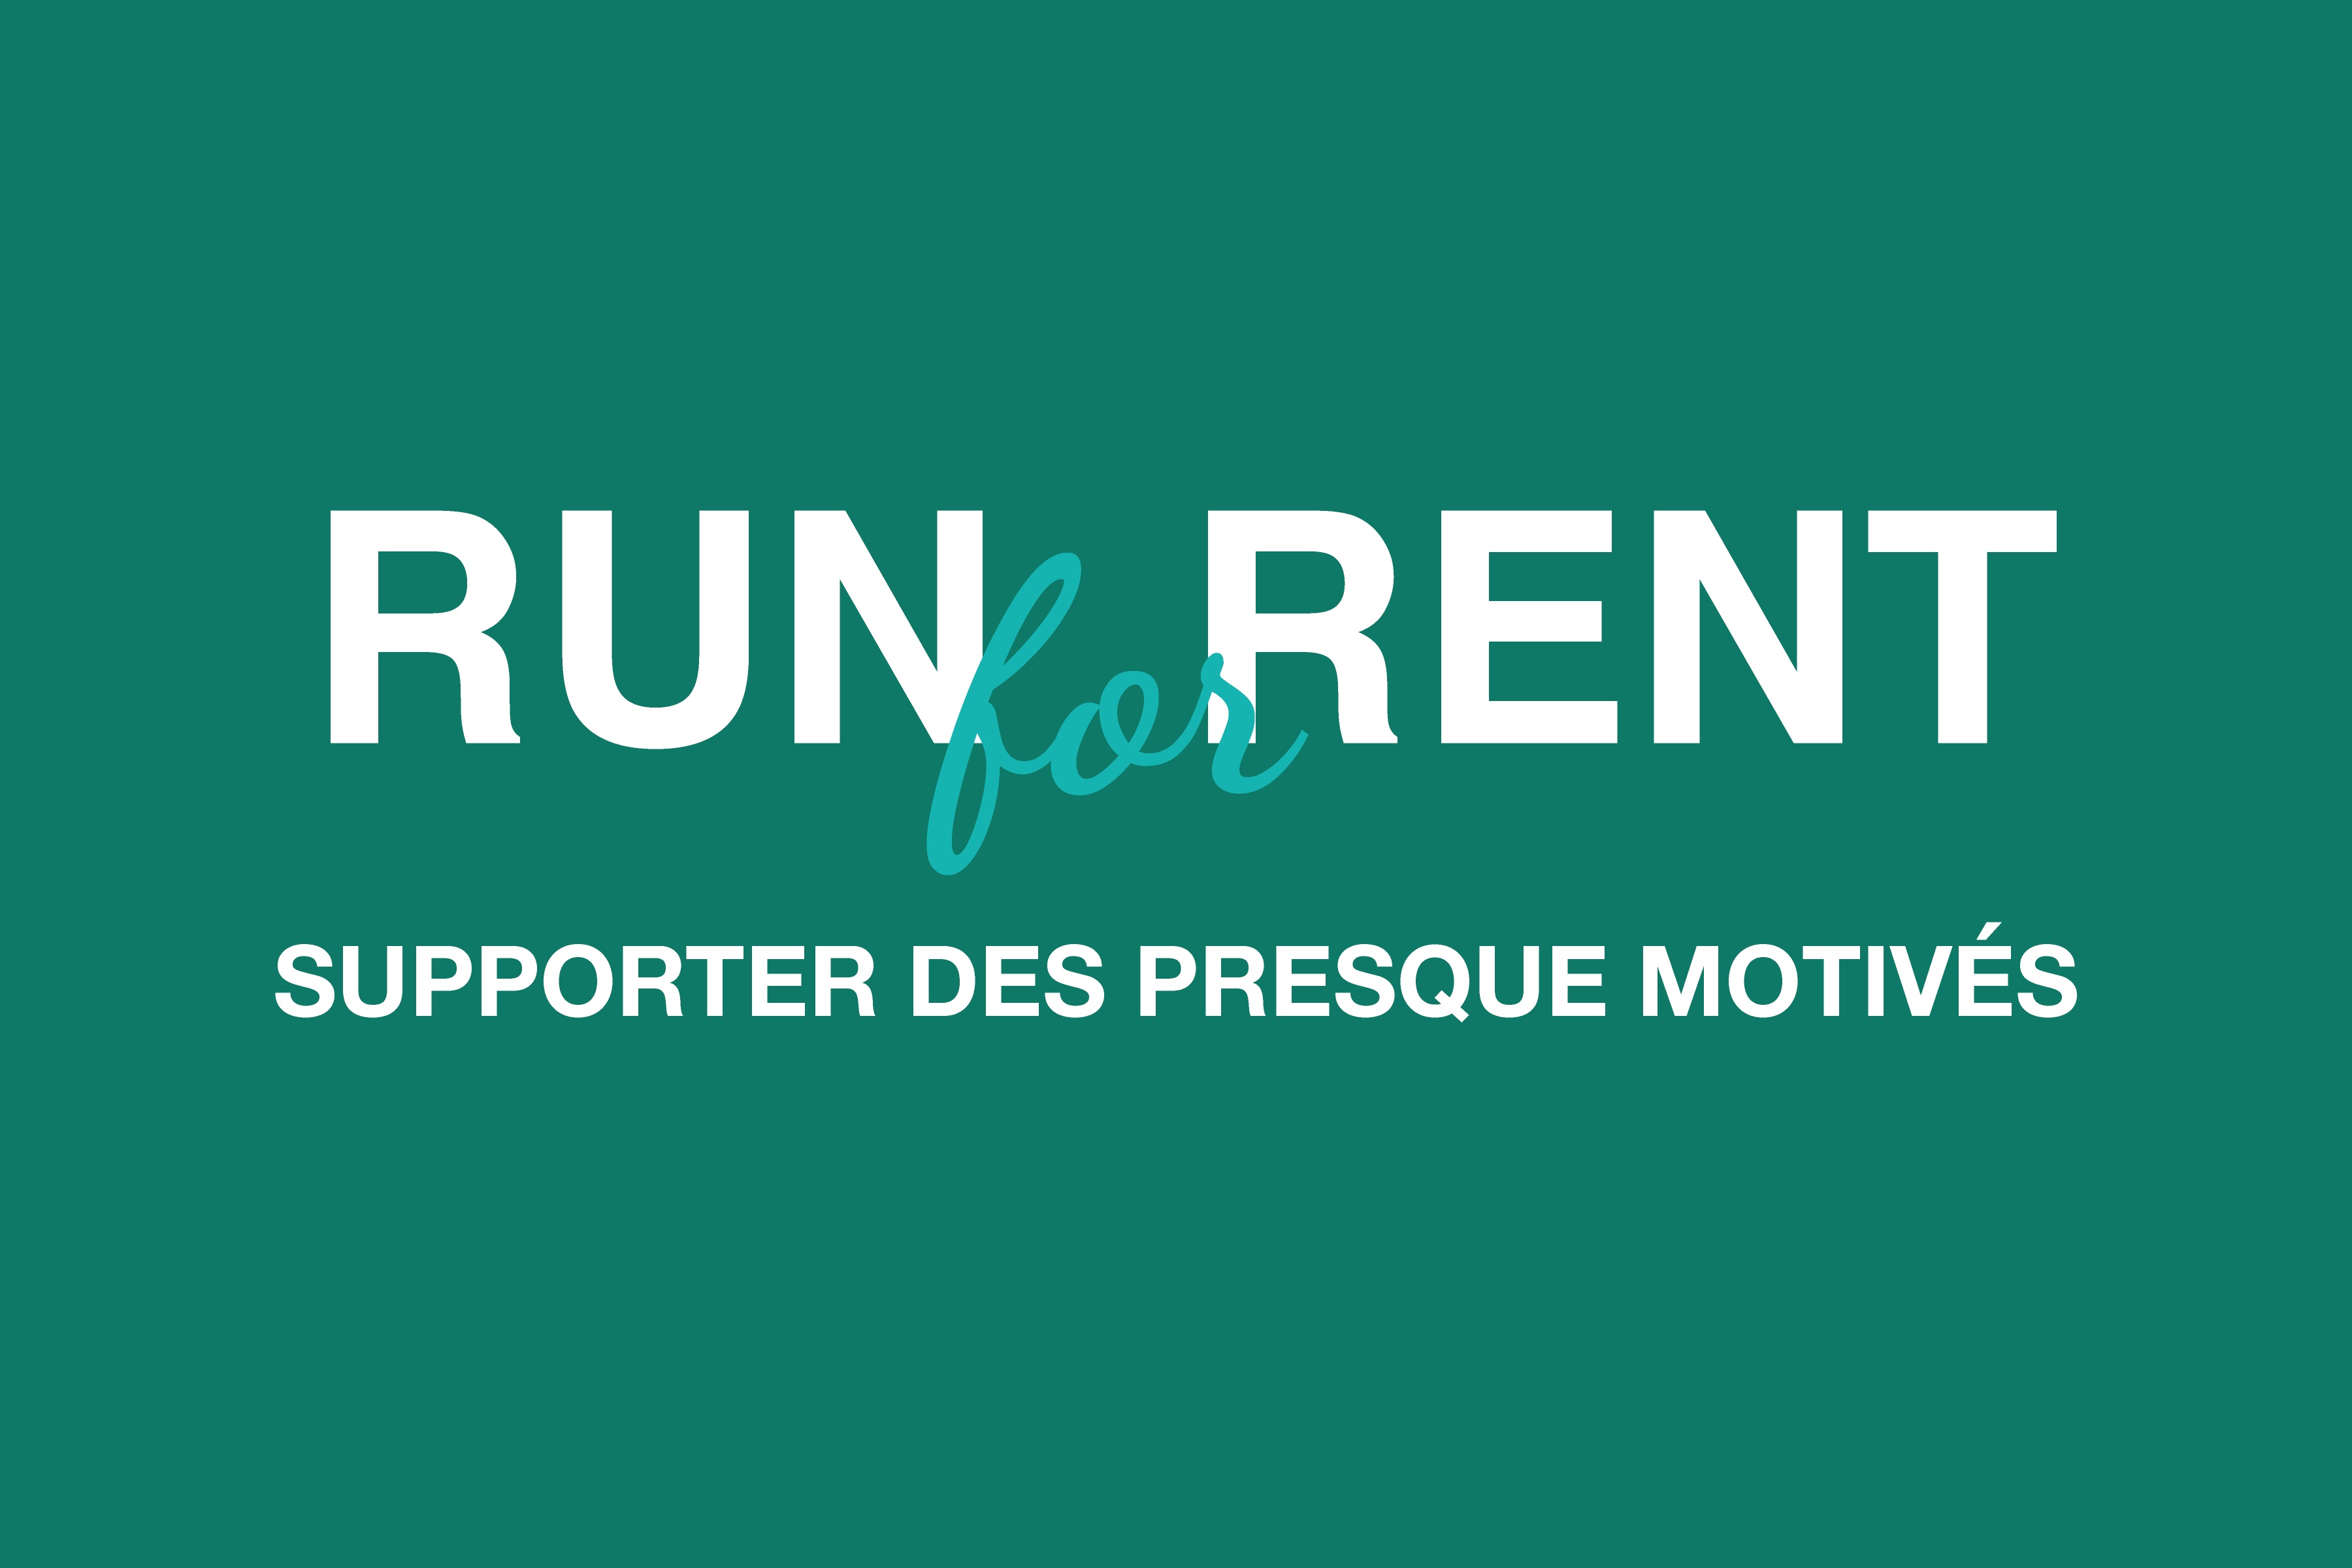 RUN FOR RENT